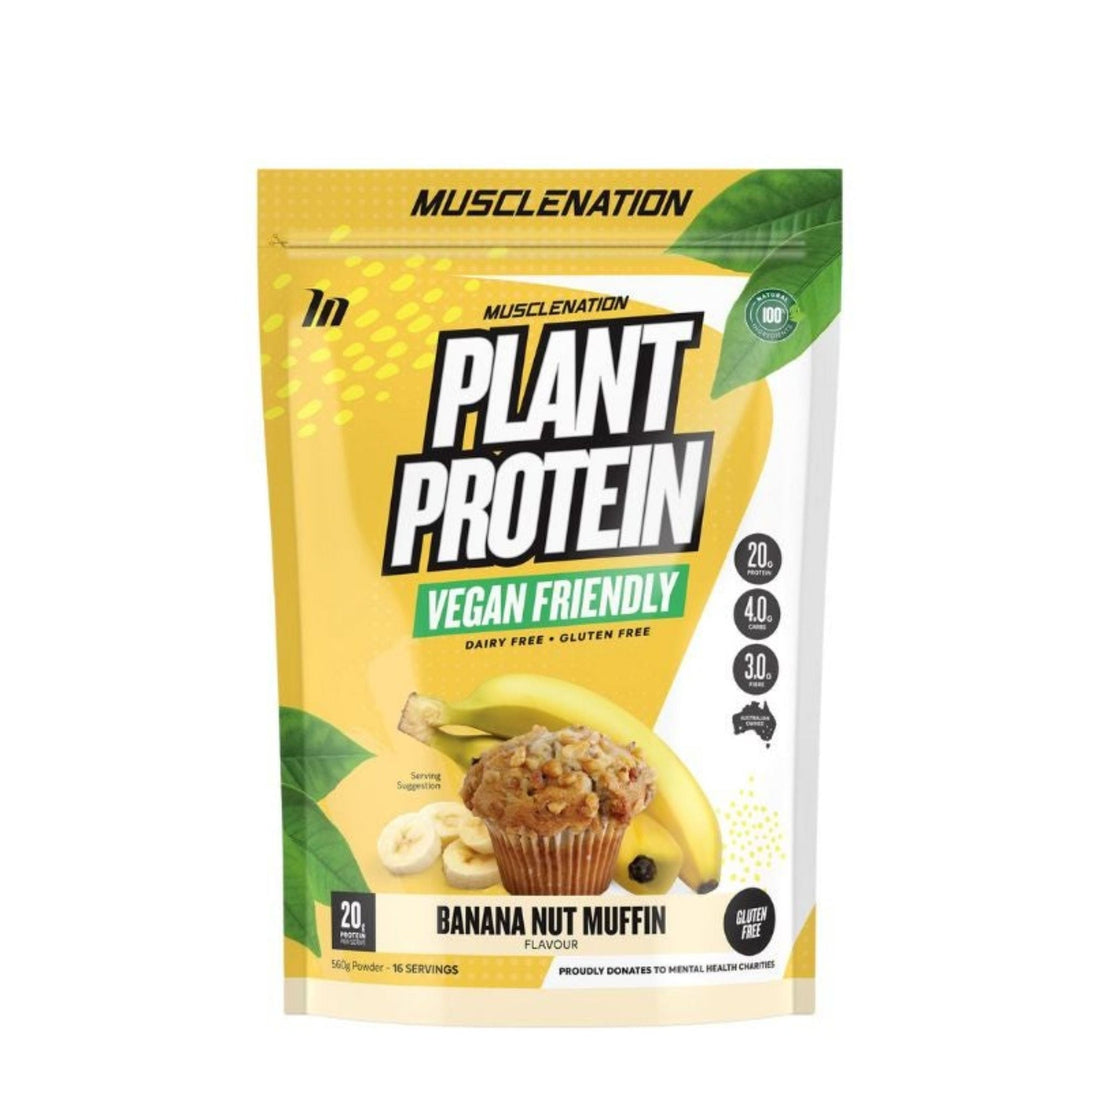 Muscle NationPlant Protein